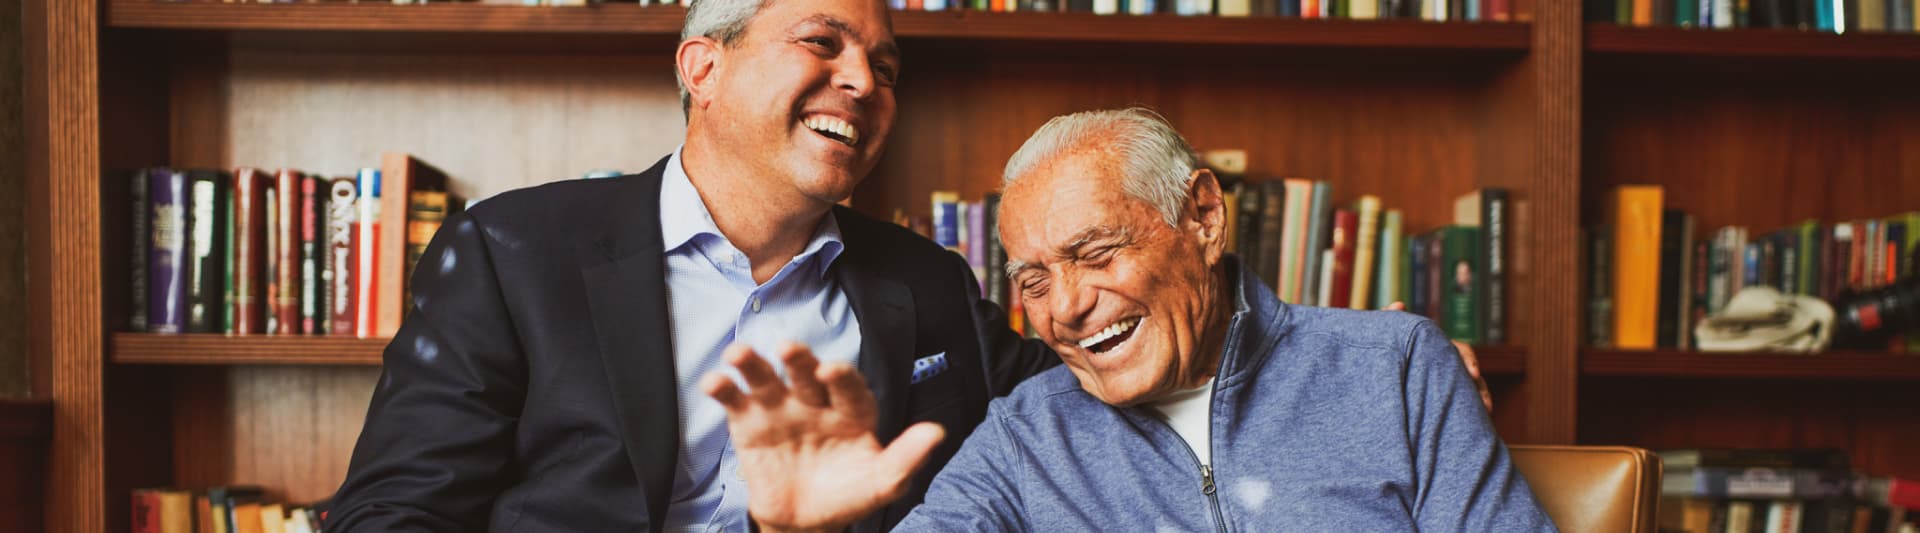 Two residents smiling and laughing